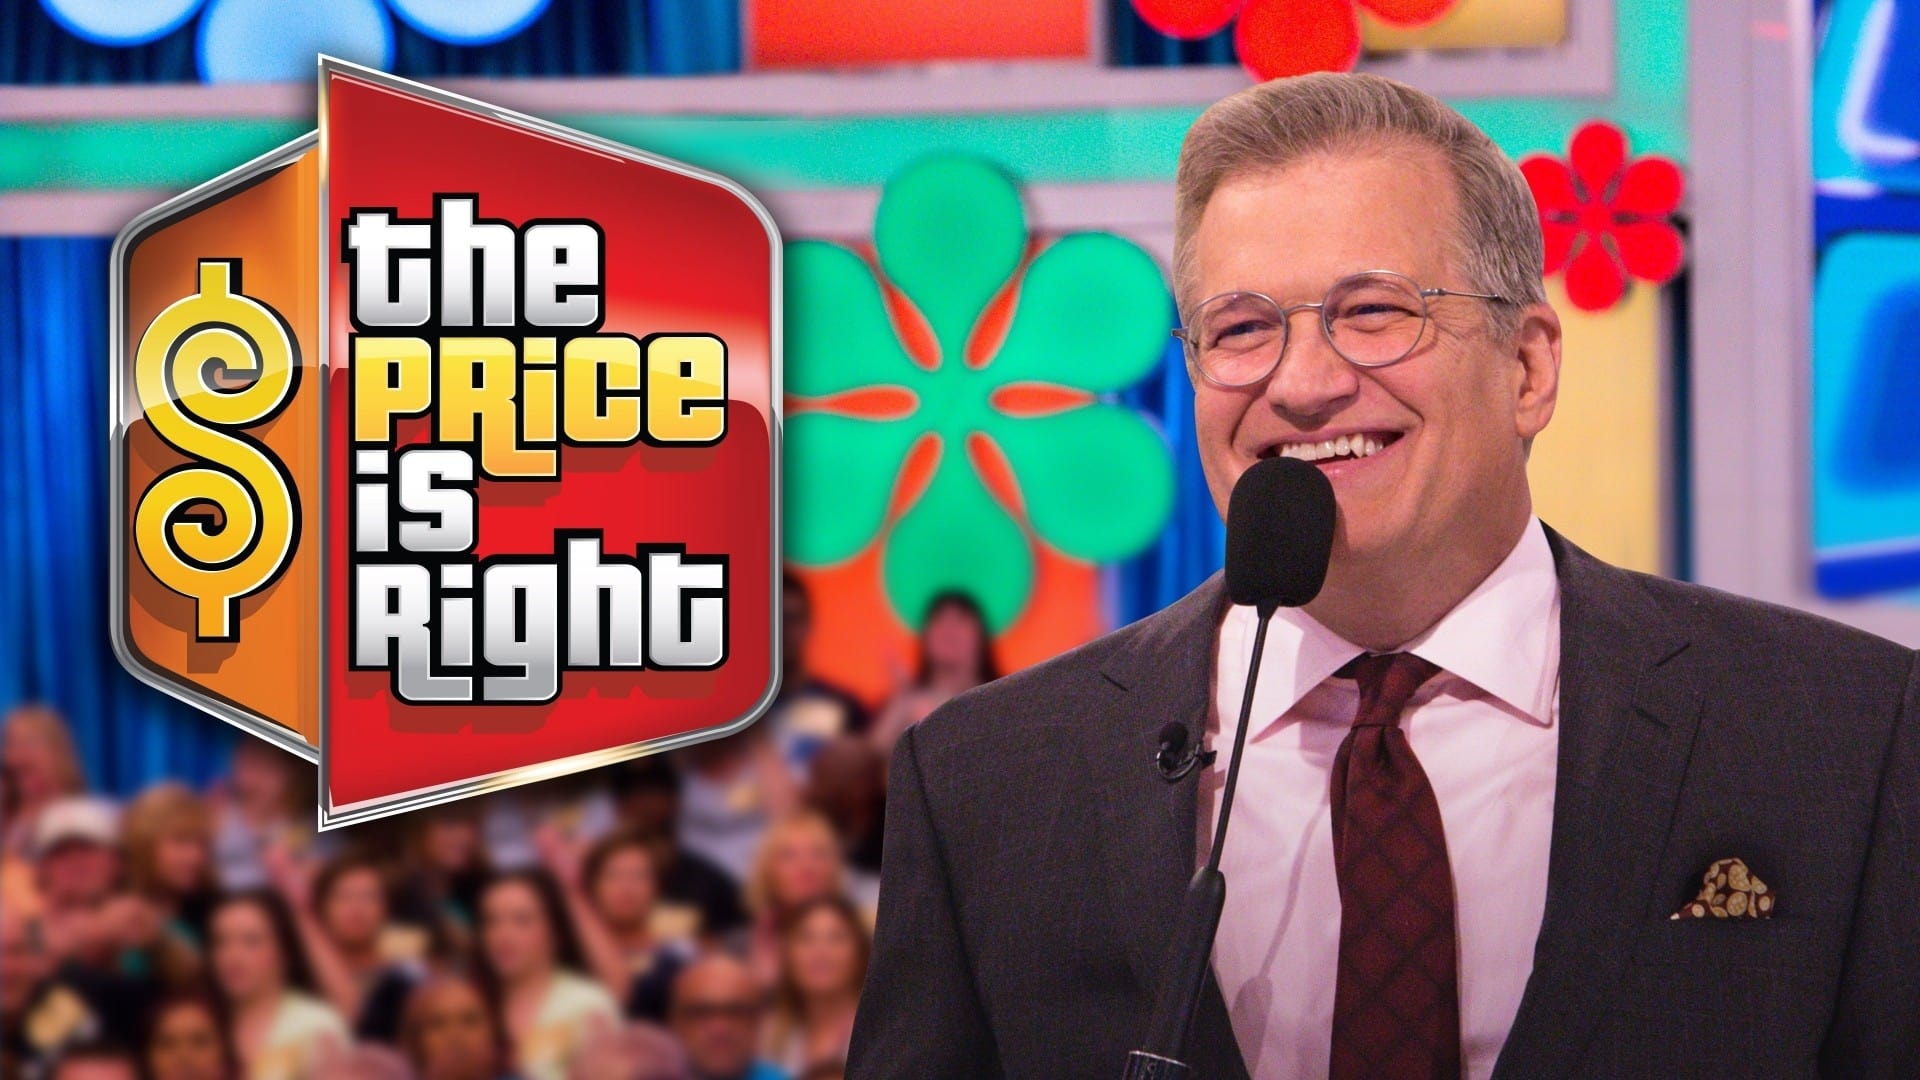 The Price Is Right - Season 5 Episode 63 : The Price Is Right Season 5 Episode 63